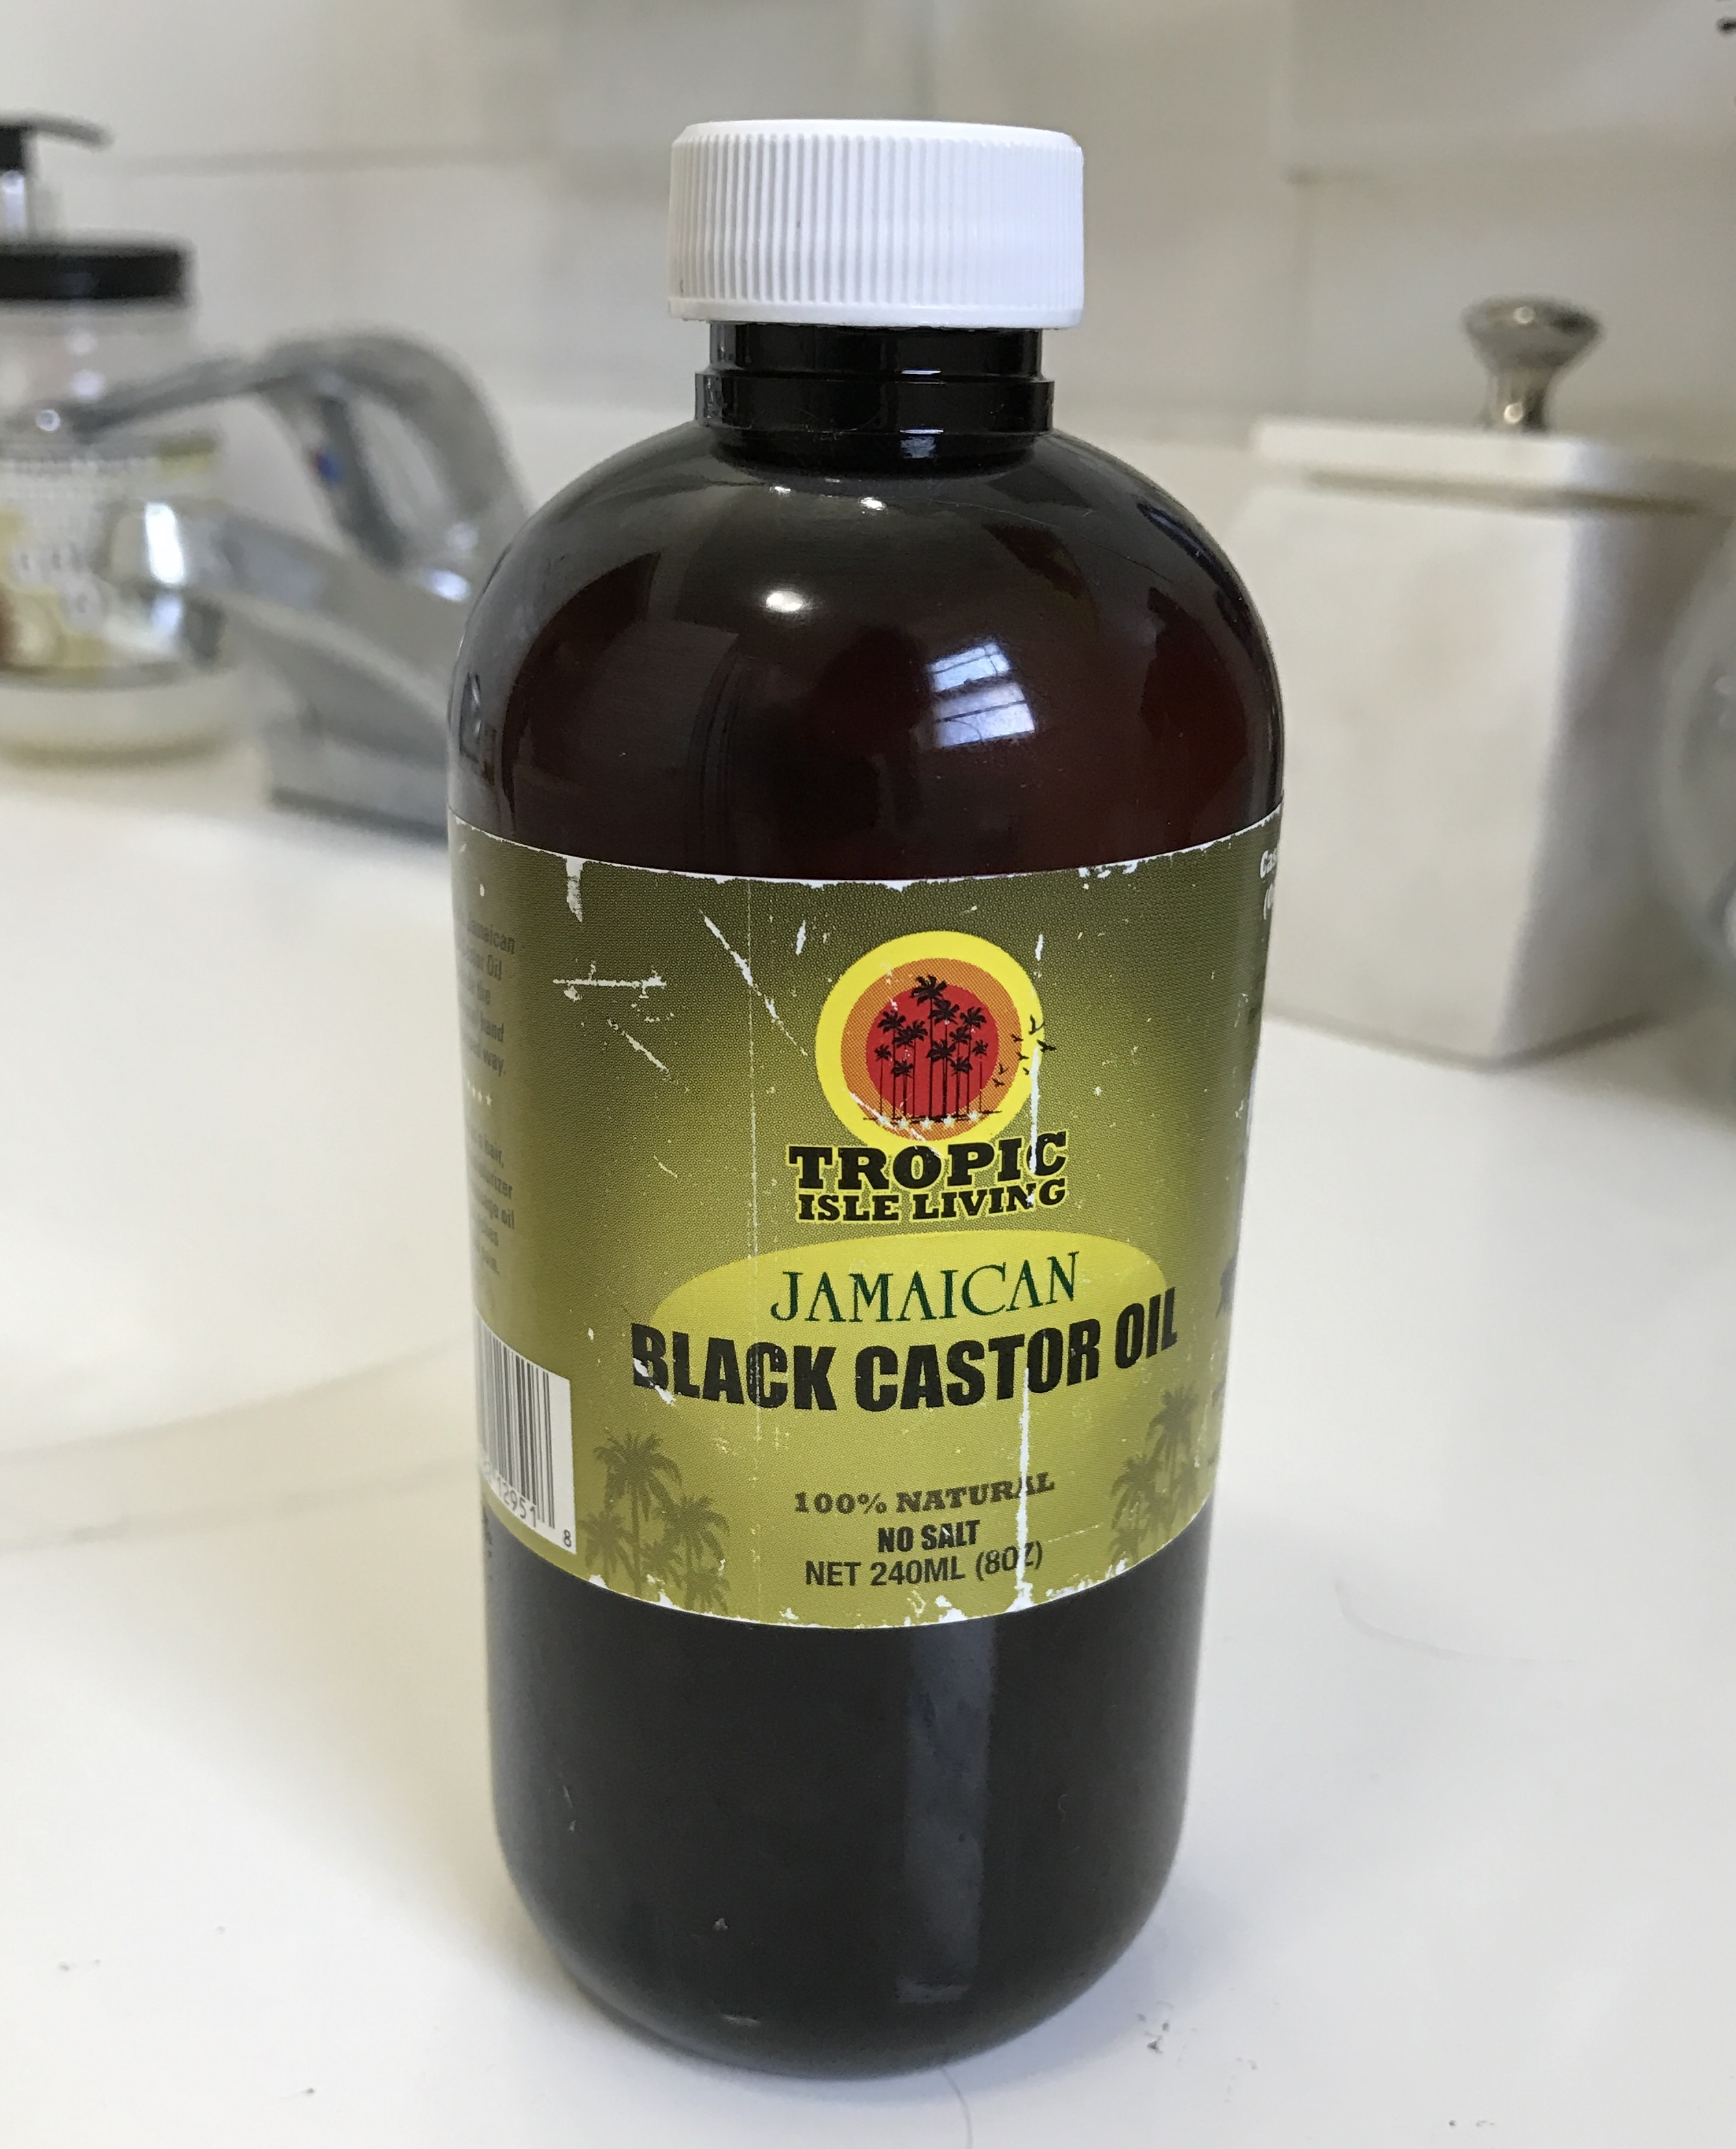 Jamaican Black Castor Oil: The Oil Your Natural Locks Have Been Craving